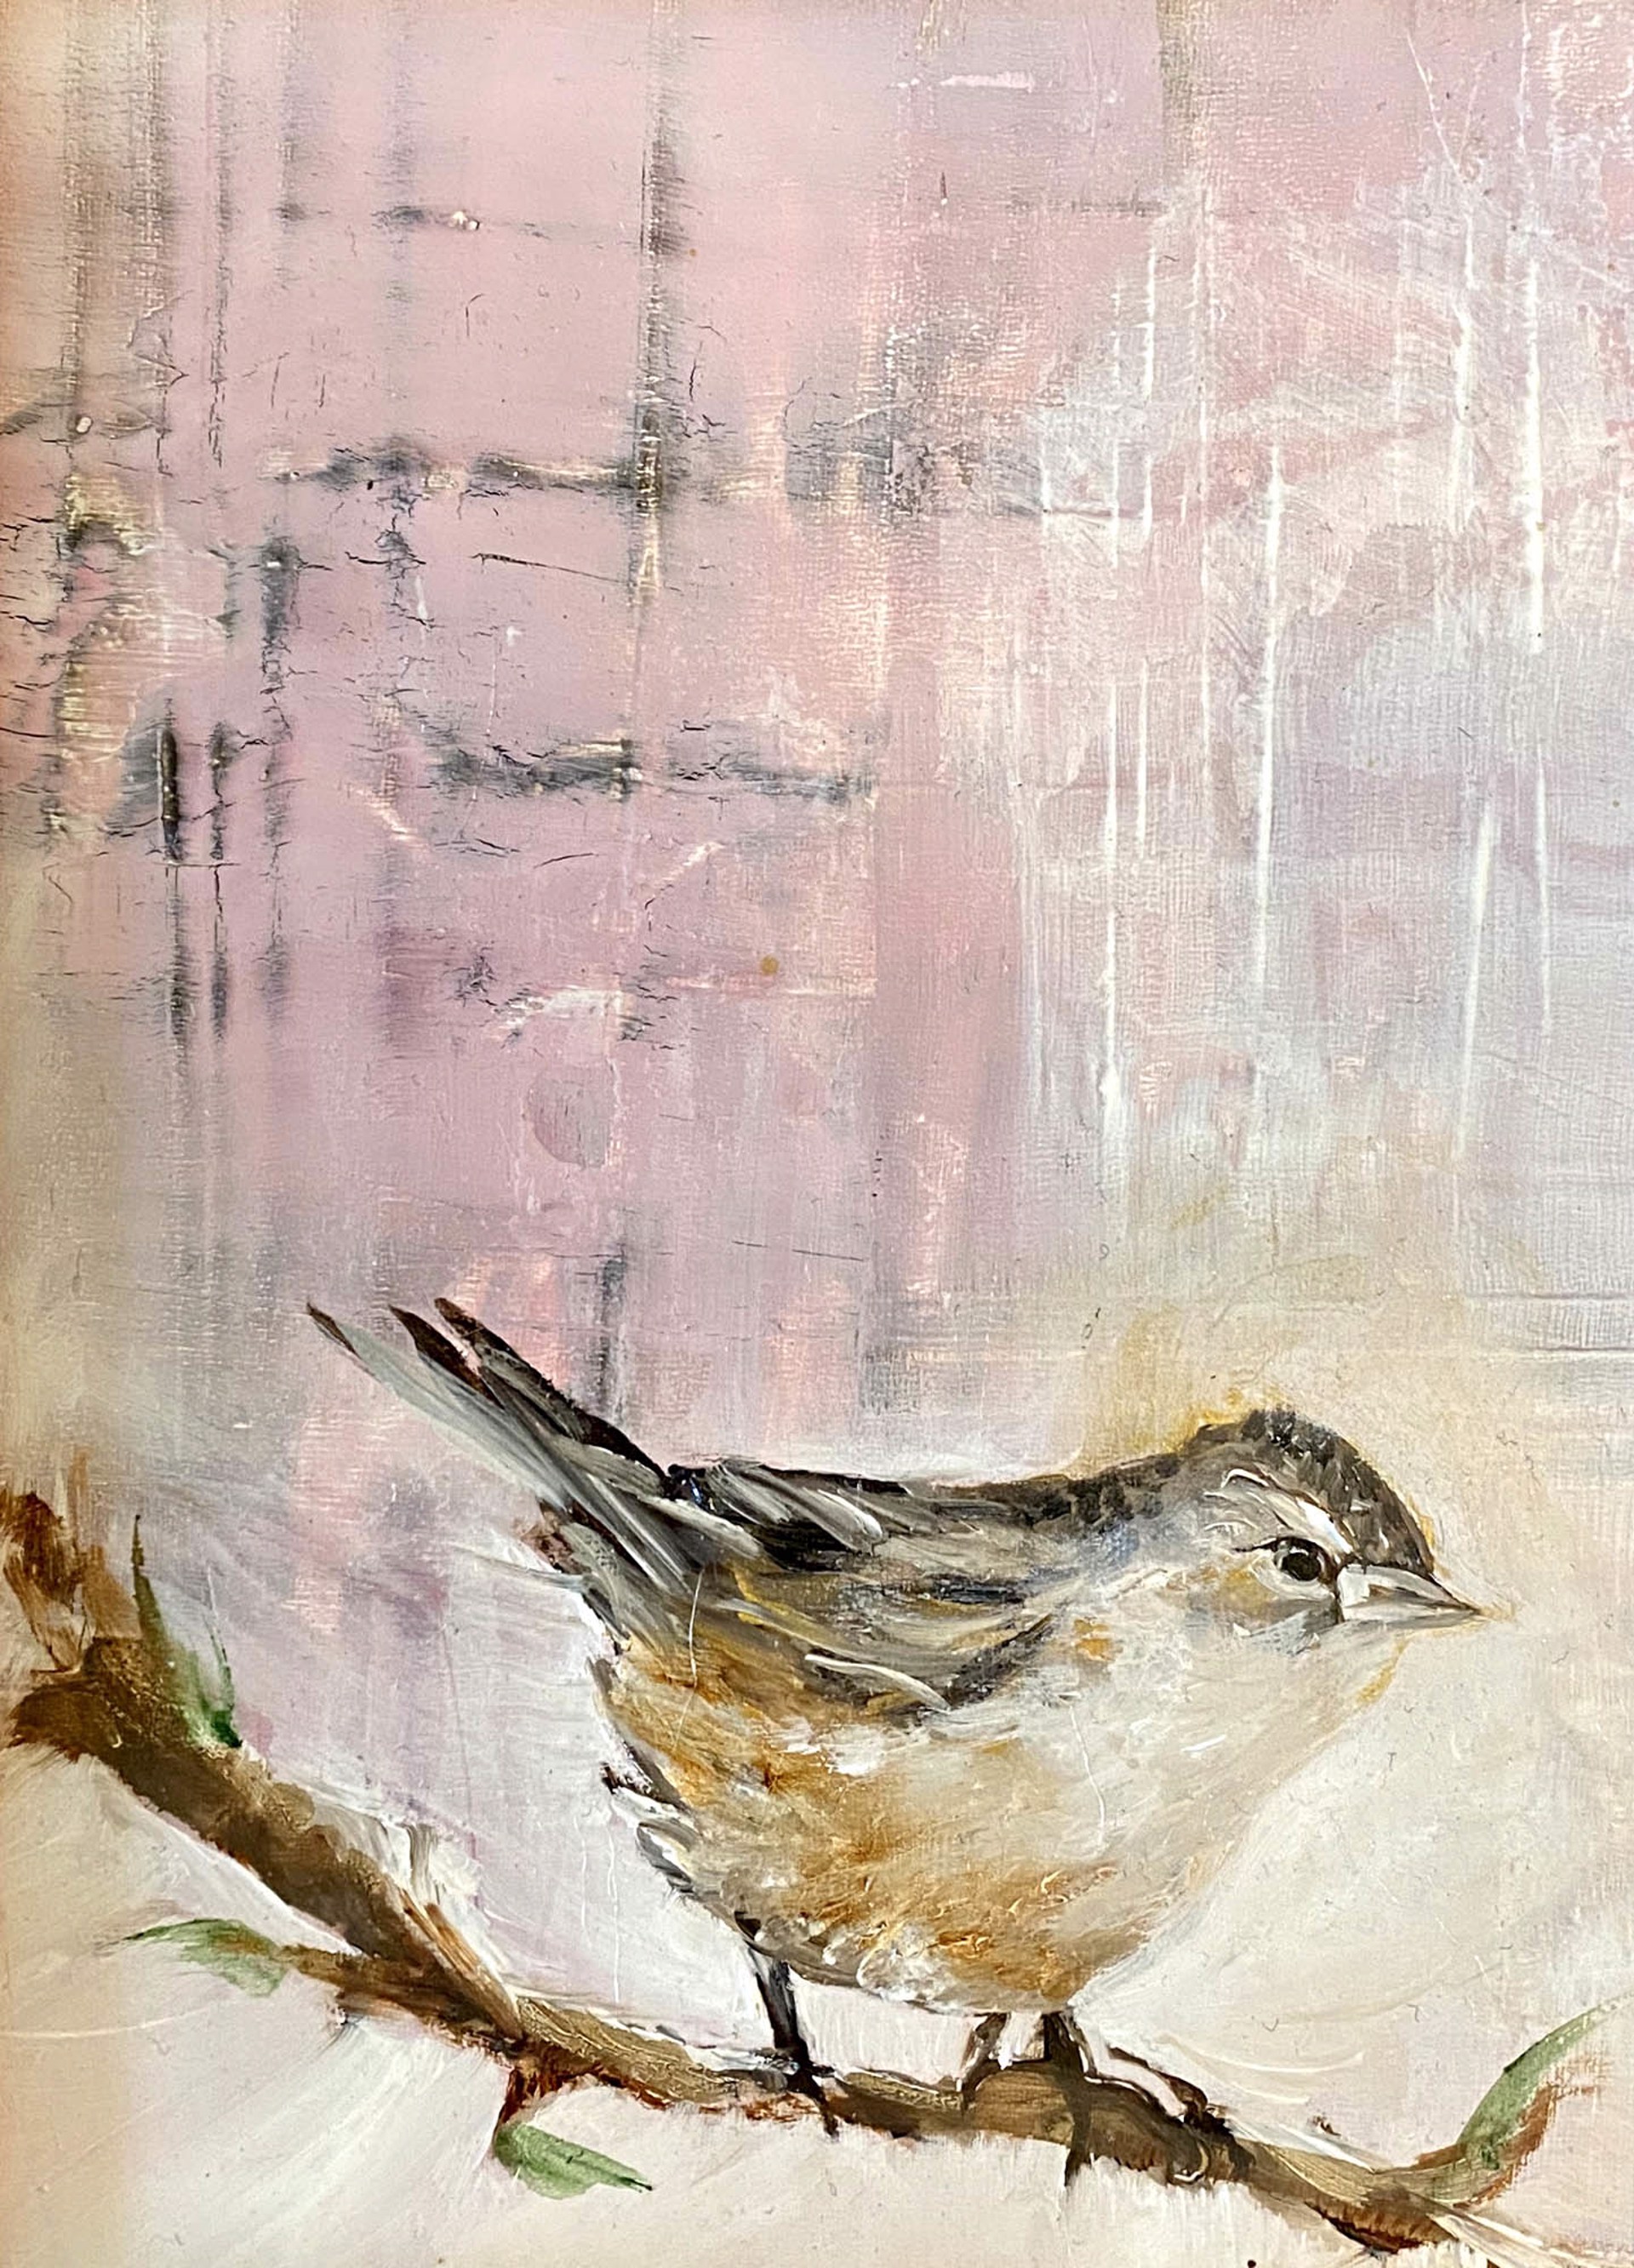 An Original Oil Painting Of A Sparrow Bird Perched On A Twig Featuring A Pink And Creme Contemporary Background, By Jenna Von Benedikt